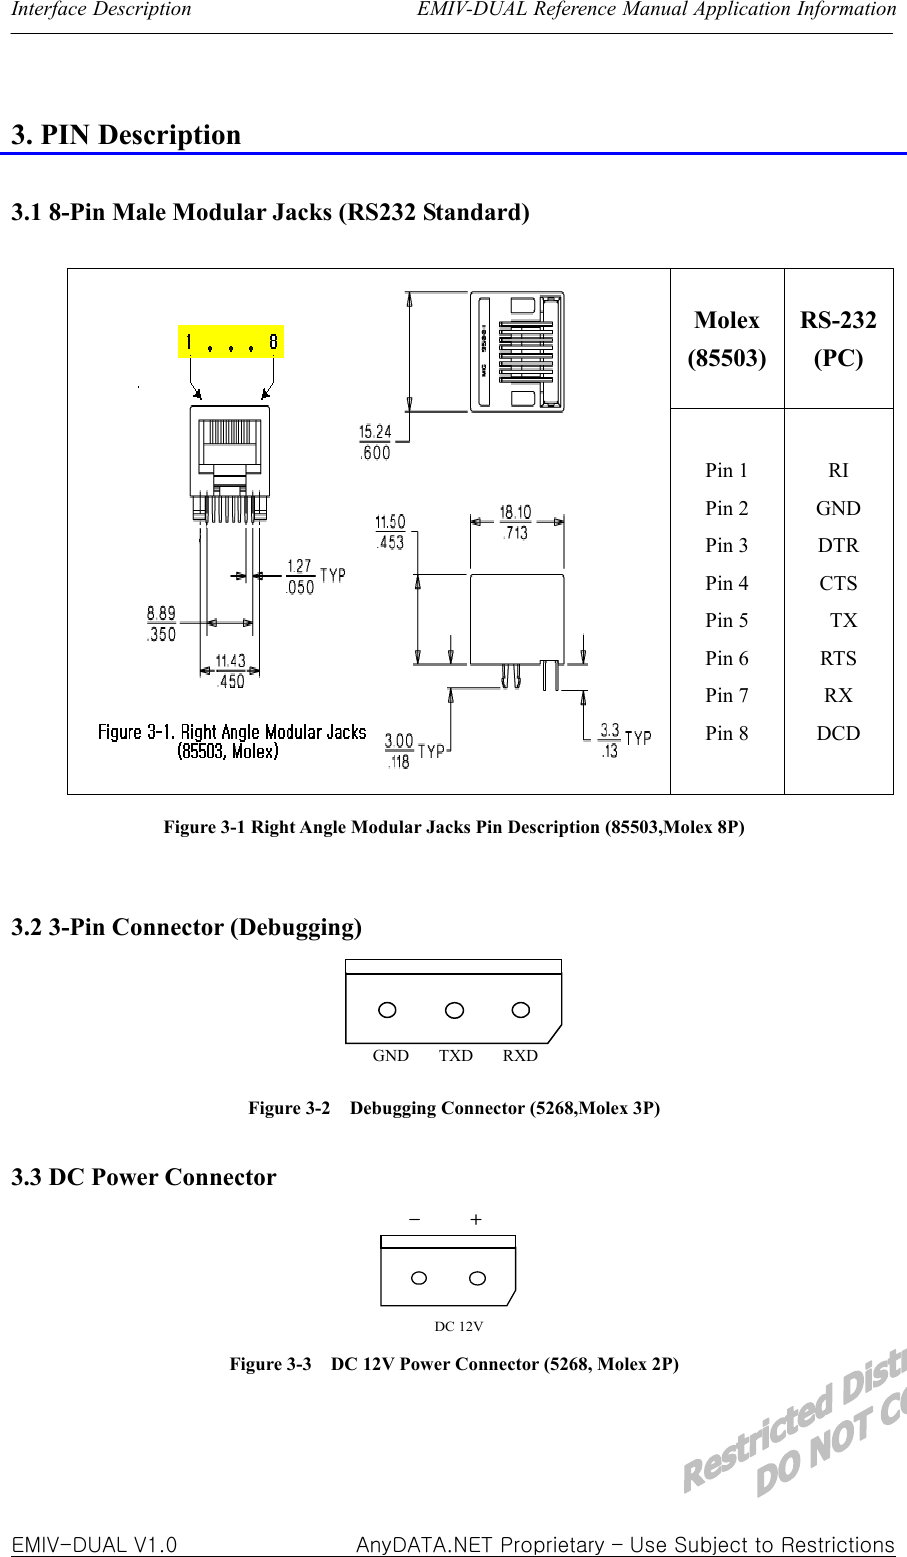 Interface Description                      EMIV-DUAL Reference Manual Application Information  EMIV-DUAL V1.0                 AnyDATA.NET Proprietary – Use Subject to Restrictions 3. PIN Description  3.1 8-Pin Male Modular Jacks (RS232 Standard)  Molex (85503) RS-232(PC) Pin 1 Pin 2 Pin 3 Pin 4 Pin 5 Pin 6 Pin 7 Pin 8 RI GND DTR CTS  TX RTS RX DCD Figure 3-1 Right Angle Modular Jacks Pin Description (85503,Molex 8P)  3.2 3-Pin Connector (Debugging) GND       TXD       RXD Figure 3-2    Debugging Connector (5268,Molex 3P)  3.3 DC Power Connector   DC 12V-+ Figure 3-3    DC 12V Power Connector (5268, Molex 2P)   